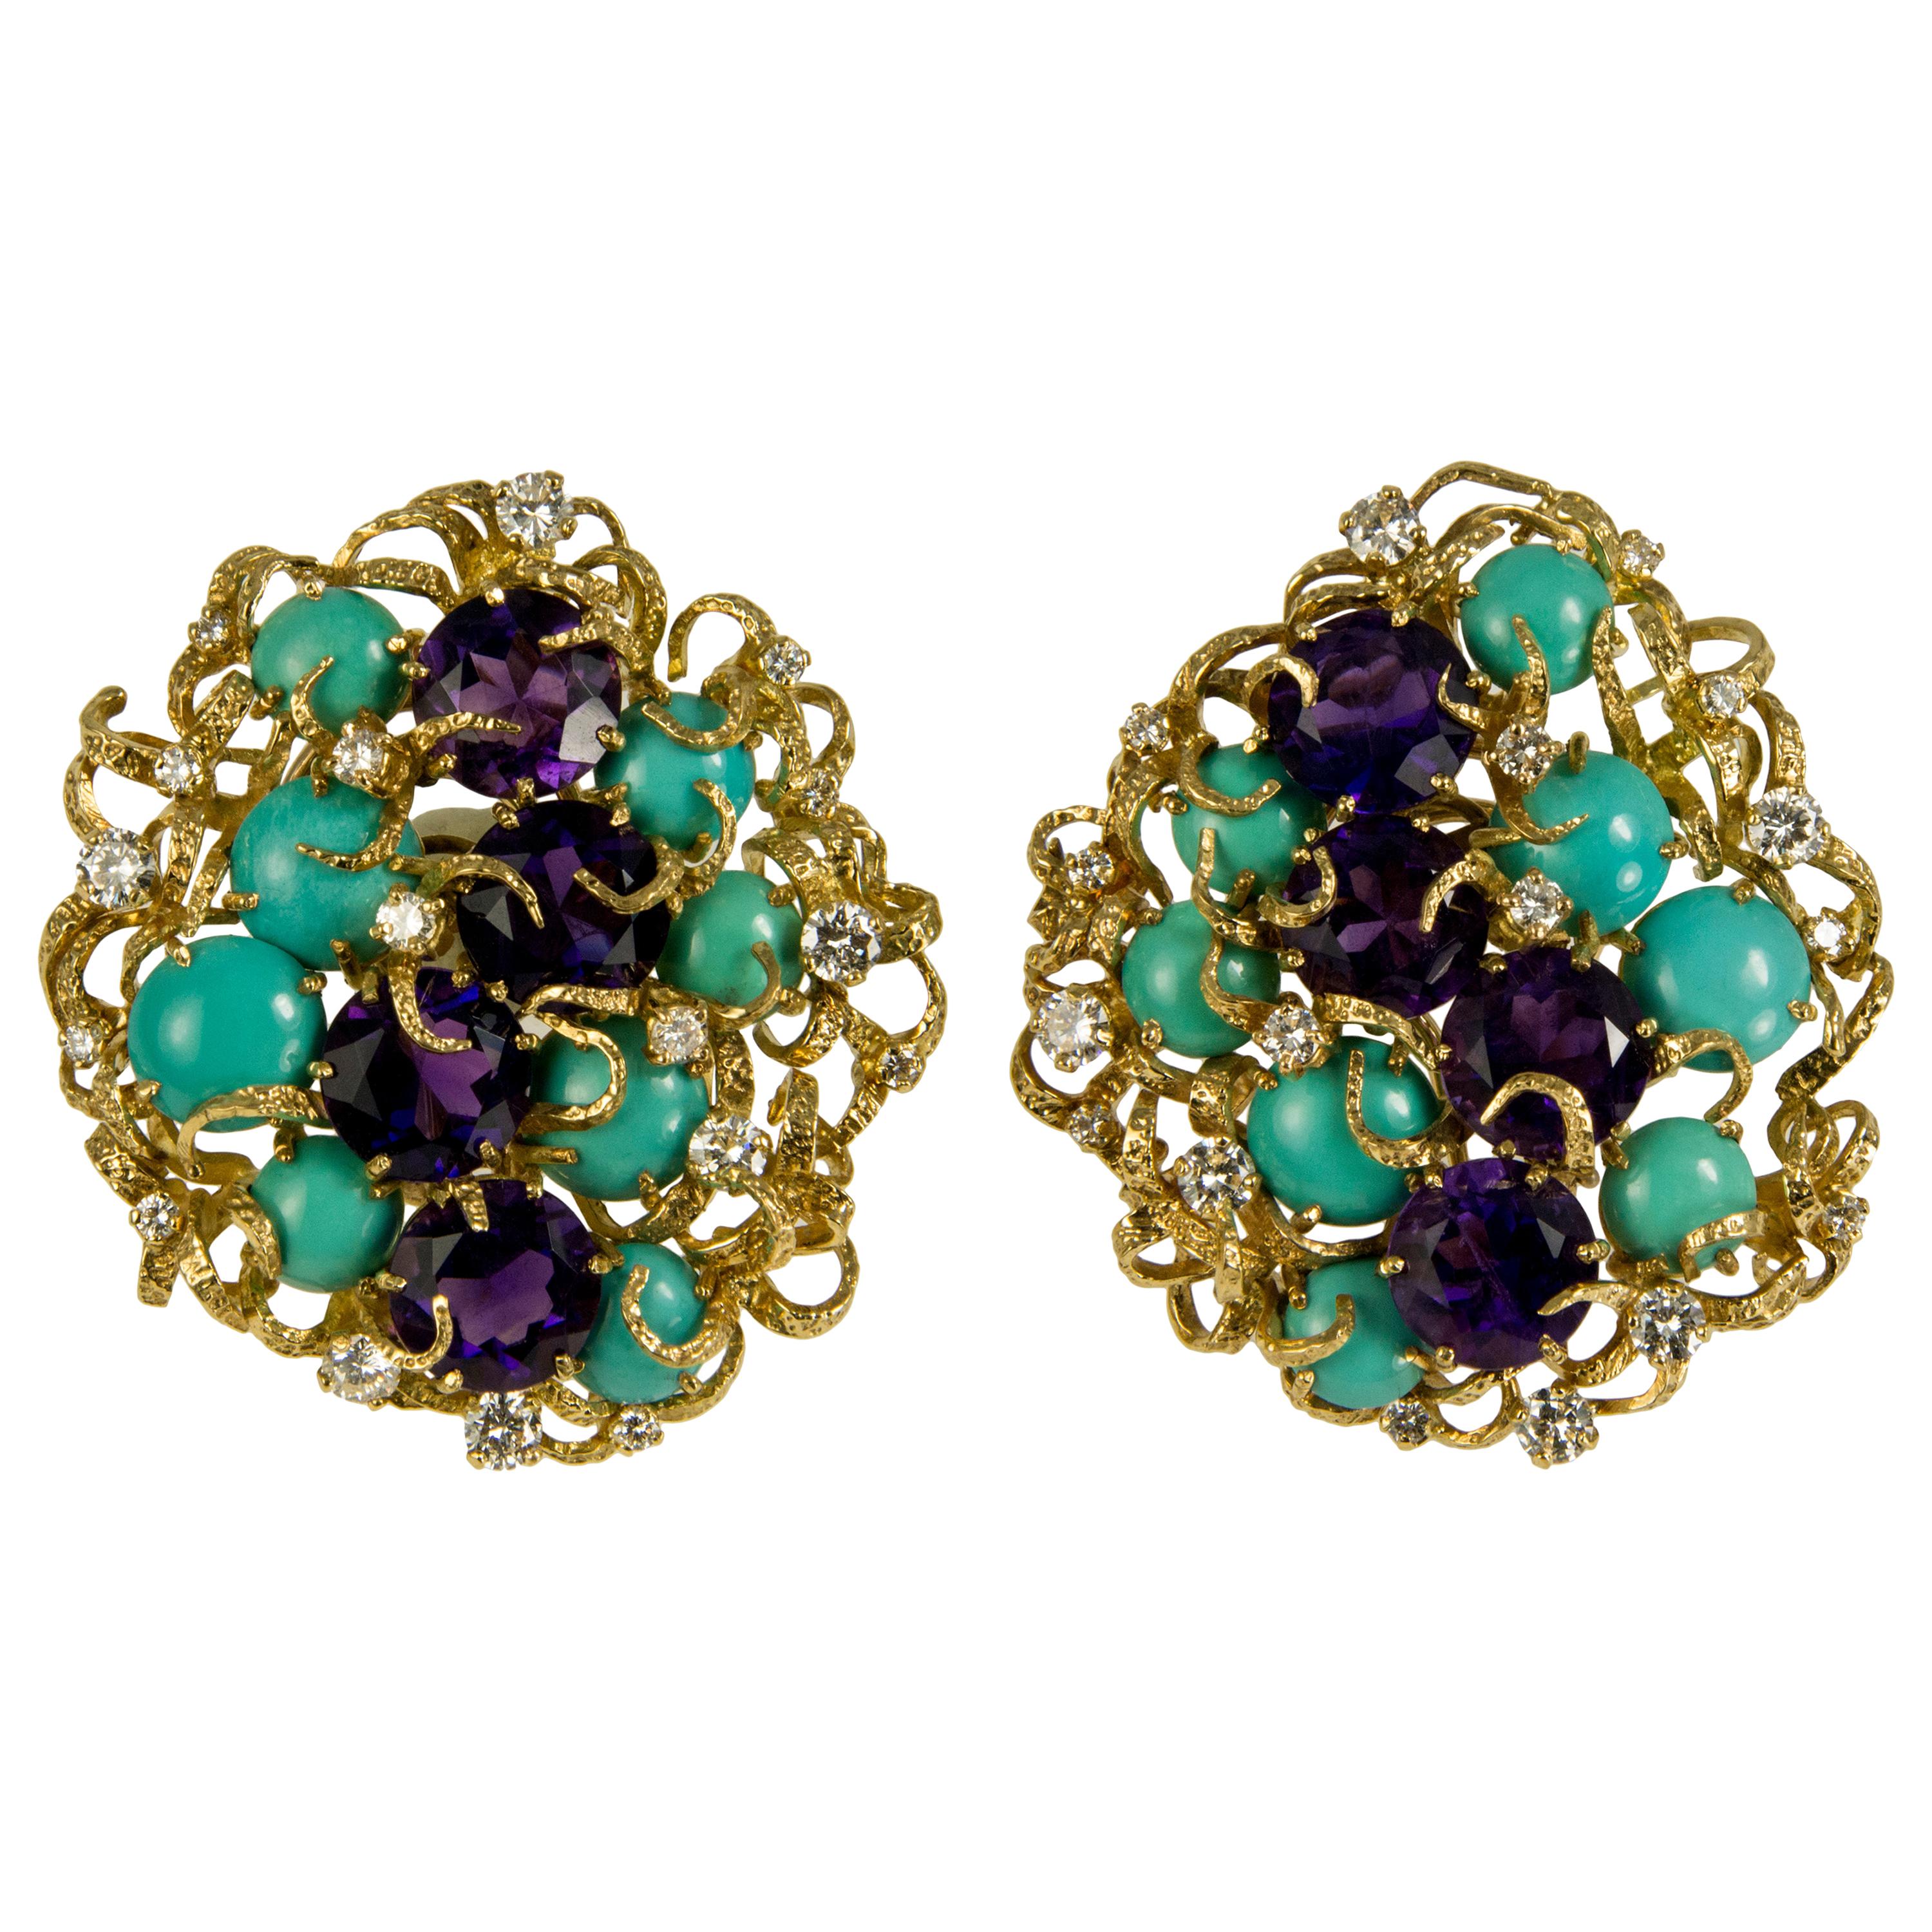 Faceted Amethyst, Cabochon Turquoise, Diamond and Gold Earrings